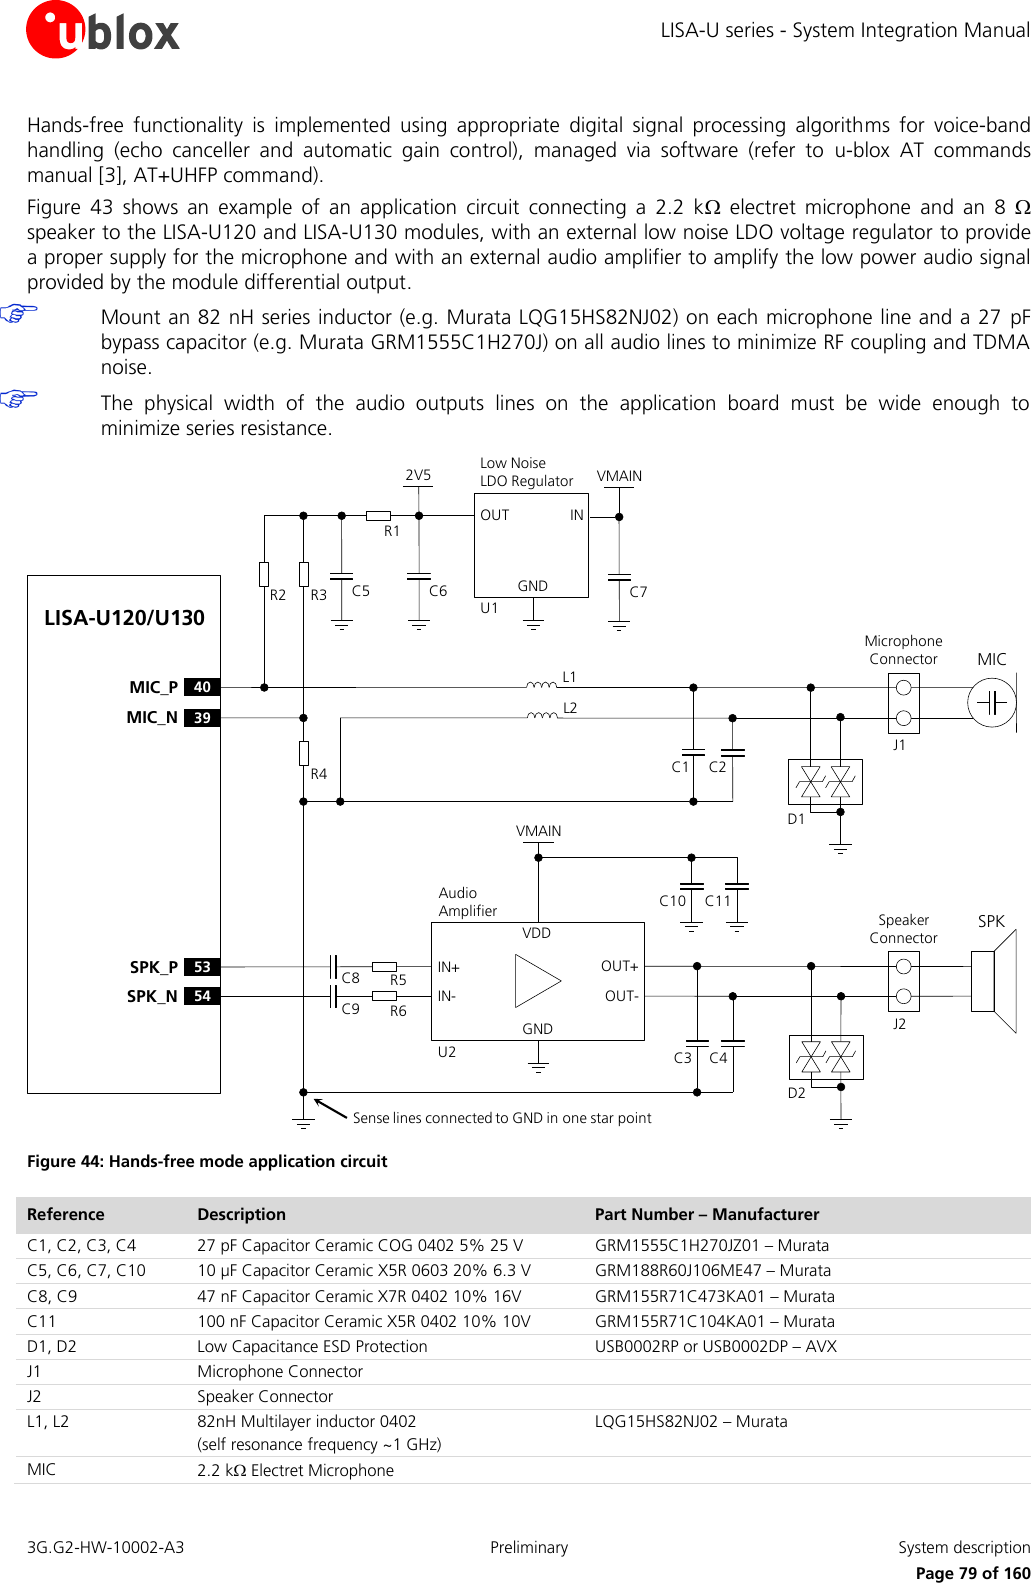 LISA-U series - System Integration Manual 3G.G2-HW-10002-A3  Preliminary  System description      Page 79 of 160 Hands-free  functionality  is  implemented  using  appropriate  digital  signal  processing  algorithms  for  voice-band handling  (echo  canceller  and  automatic  gain  control),  managed  via  software  (refer  to  u-blox AT  commands manual [3], AT+UHFP command). Figure  43  shows  an  example  of  an  application  circuit  connecting  a  2.2  k  electret  microphone  and  an 8   speaker to the LISA-U120 and LISA-U130 modules, with an external low noise LDO voltage regulator to provide a proper supply for the microphone and with an external audio amplifier to amplify the low power audio signal provided by the module differential output.  Mount an 82 nH series inductor (e.g. Murata LQG15HS82NJ02) on each microphone line and a 27 pF bypass capacitor (e.g. Murata GRM1555C1H270J) on all audio lines to minimize RF coupling and TDMA noise.  The  physical  width  of  the  audio  outputs  lines  on  the  application  board  must  be  wide  enough  to minimize series resistance. C1 C2C3L139MIC_N53SPK_P40MIC_P54SPK_ND1Microphone ConnectorD2INOUTGNDLow Noise LDO RegulatorU1R4R1C6R3R2 C52V5Sense lines connected to GND in one star pointC4SPKL2MICSpeaker ConnectorOUT+IN+GNDVMAINU2OUT-IN-C8C9R5R6VDDC11C10LISA-U120/U130Audio AmplifierJ1J2VMAINC7 Figure 44: Hands-free mode application circuit Reference Description Part Number – Manufacturer C1, C2, C3, C4 27 pF Capacitor Ceramic COG 0402 5% 25 V  GRM1555C1H270JZ01 – Murata C5, C6, C7, C10 10 µF Capacitor Ceramic X5R 0603 20% 6.3 V GRM188R60J106ME47 – Murata C8, C9 47 nF Capacitor Ceramic X7R 0402 10% 16V GRM155R71C473KA01 – Murata C11 100 nF Capacitor Ceramic X5R 0402 10% 10V GRM155R71C104KA01 – Murata D1, D2 Low Capacitance ESD Protection USB0002RP or USB0002DP – AVX J1 Microphone Connector  J2 Speaker Connector  L1, L2 82nH Multilayer inductor 0402 (self resonance frequency ~1 GHz) LQG15HS82NJ02 – Murata MIC 2.2 k Electret Microphone  